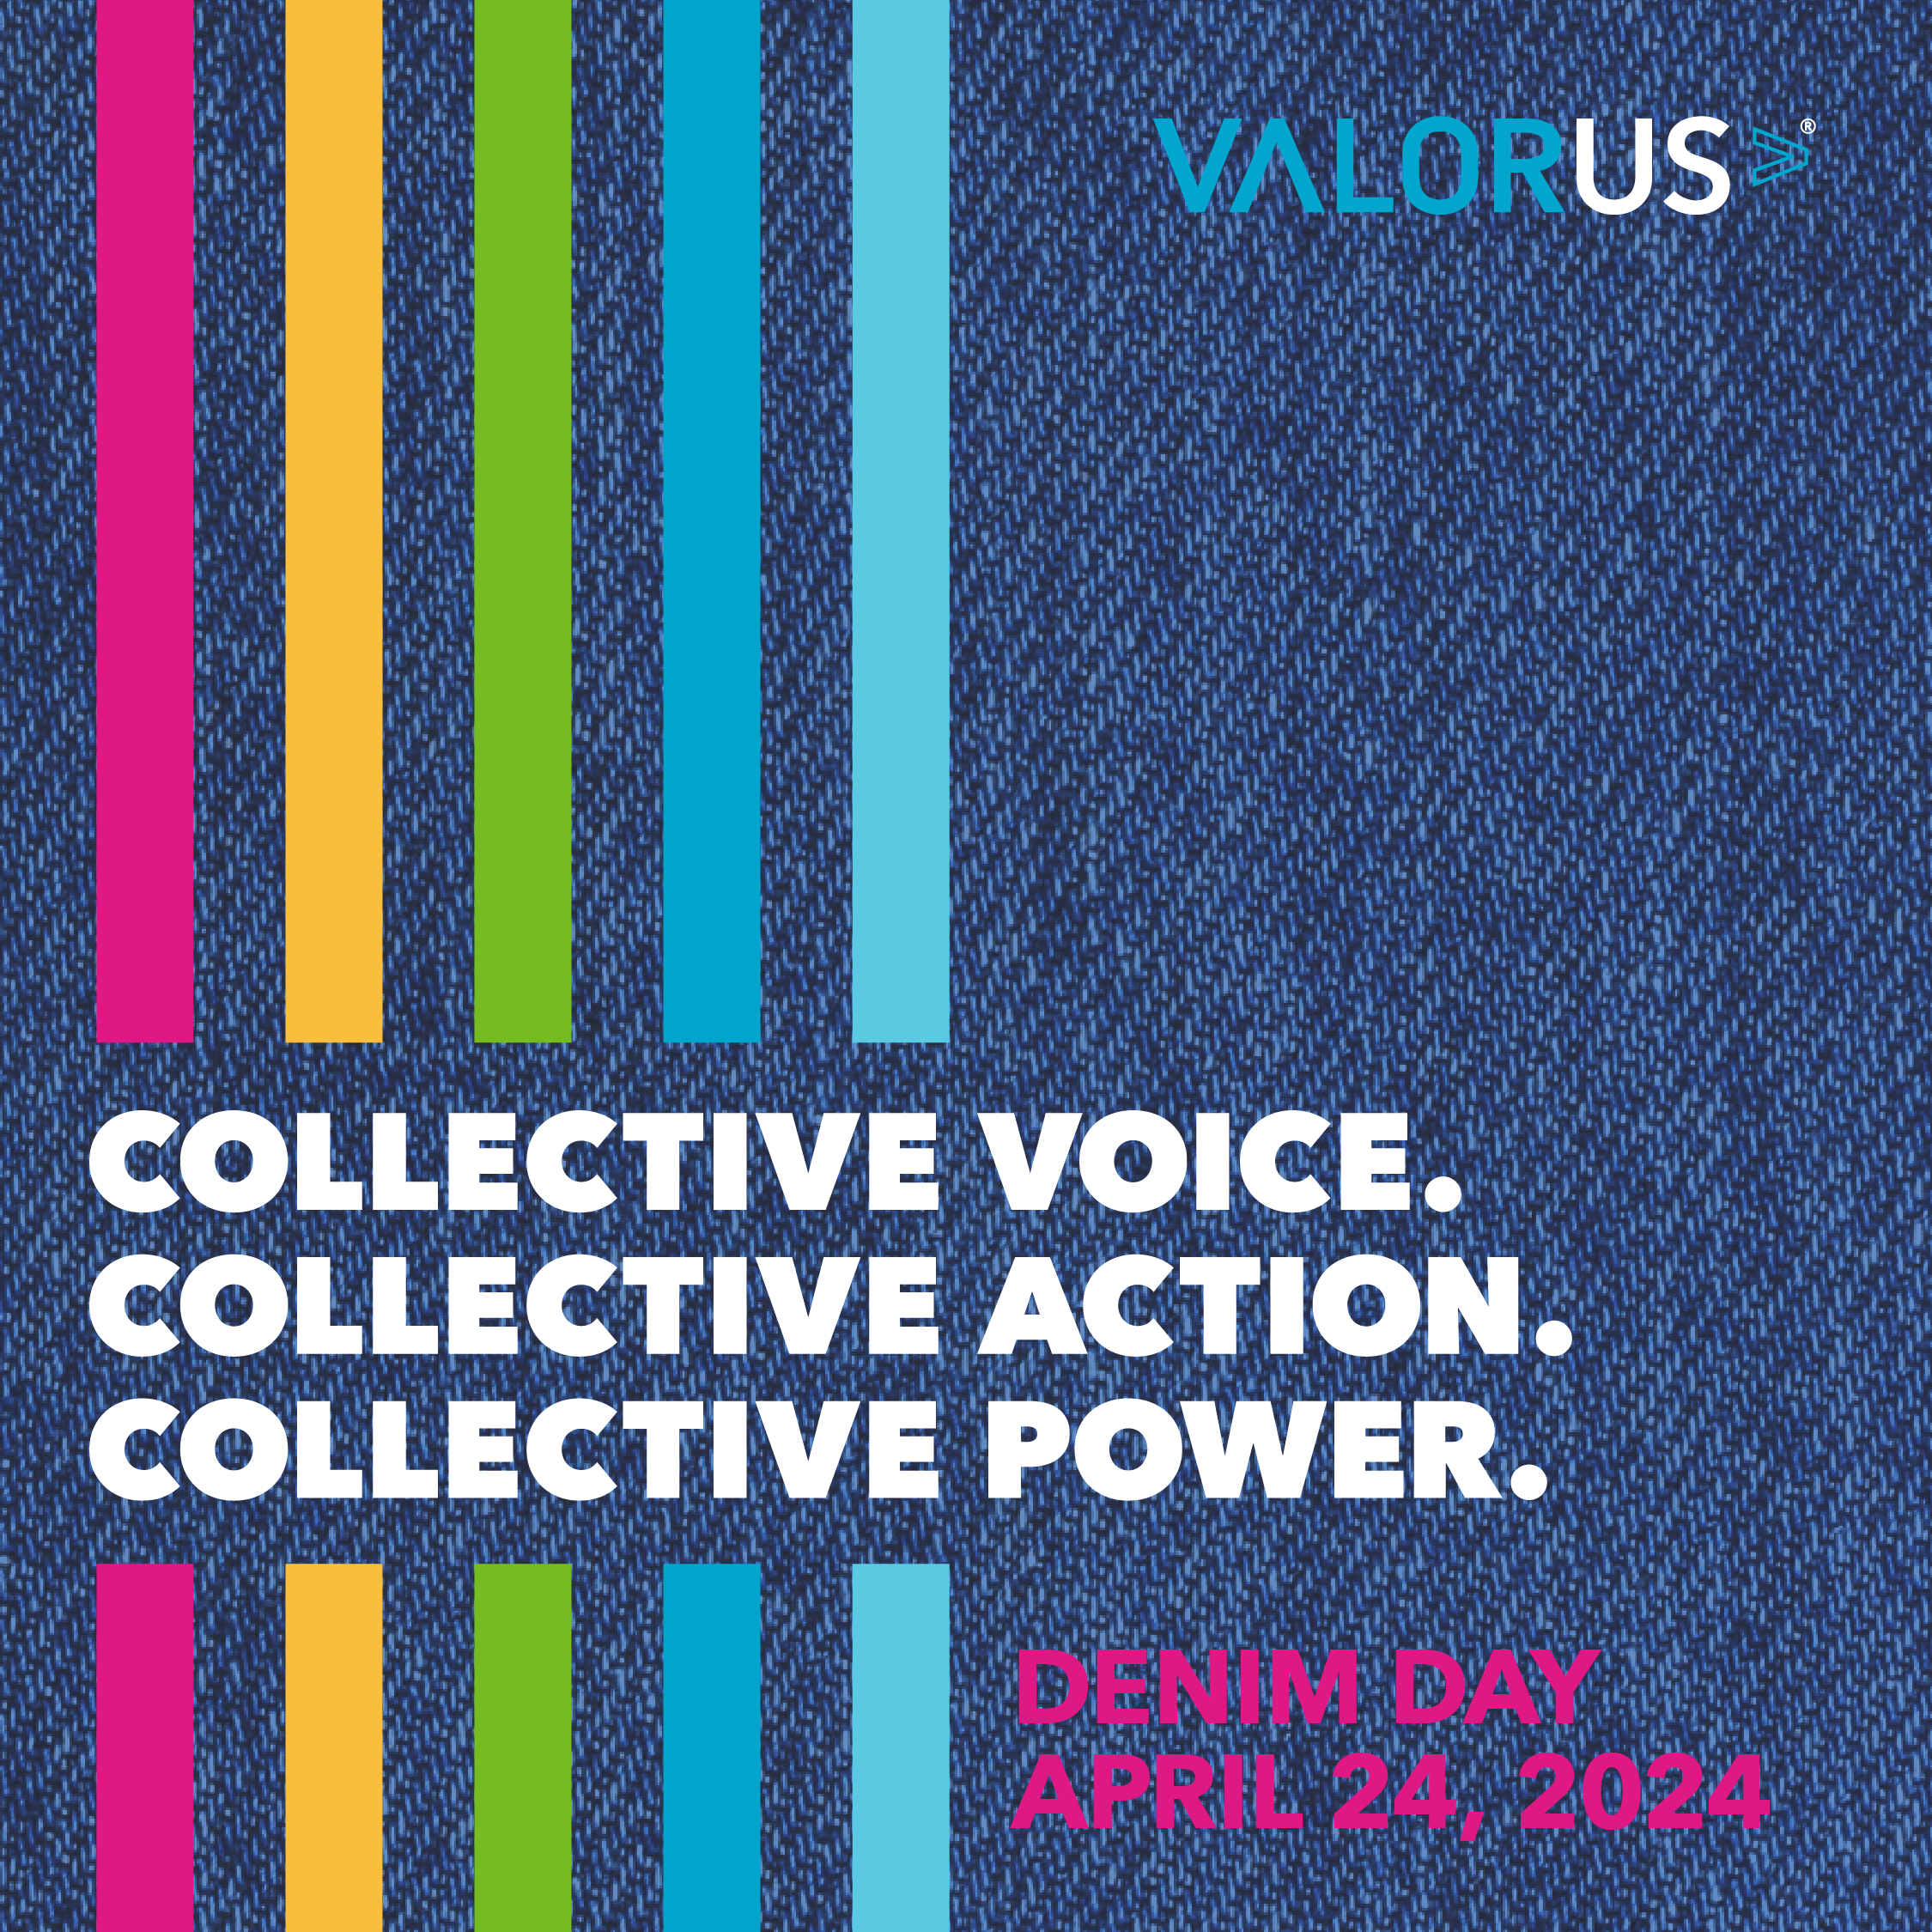 A denim background with five colored stripes on the left side. Text splitting the stripes states "Collective Voice. Collective Action. Collective Power." On the bottom left, the text states "Denim Day, April 24, 2024." VALOR logo.